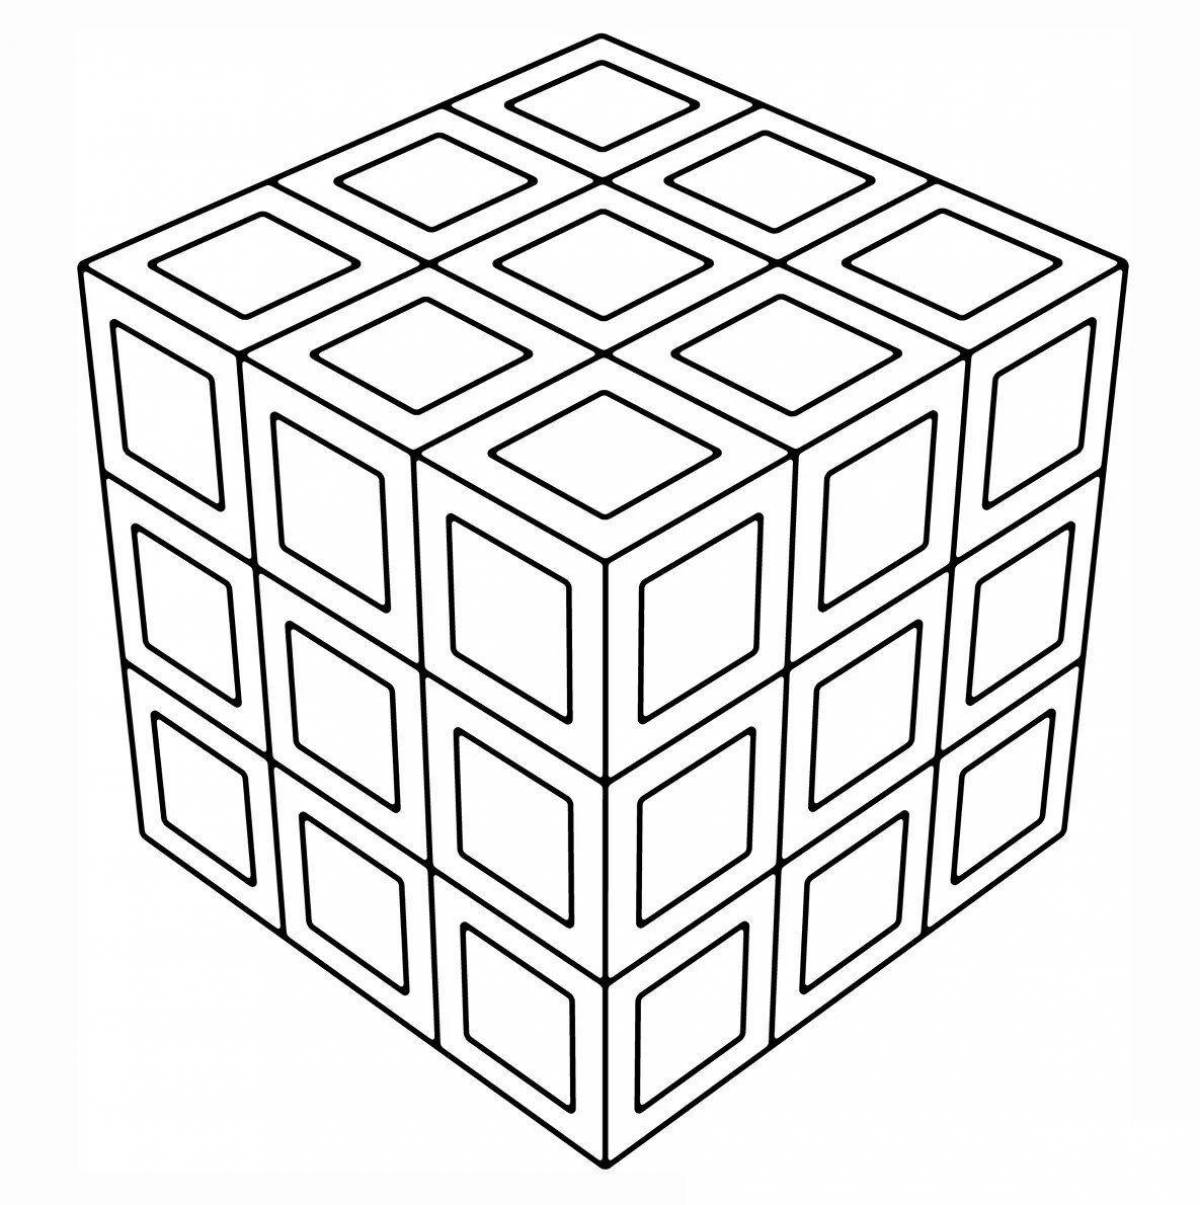 Colored rubik's cube coloring book for kids